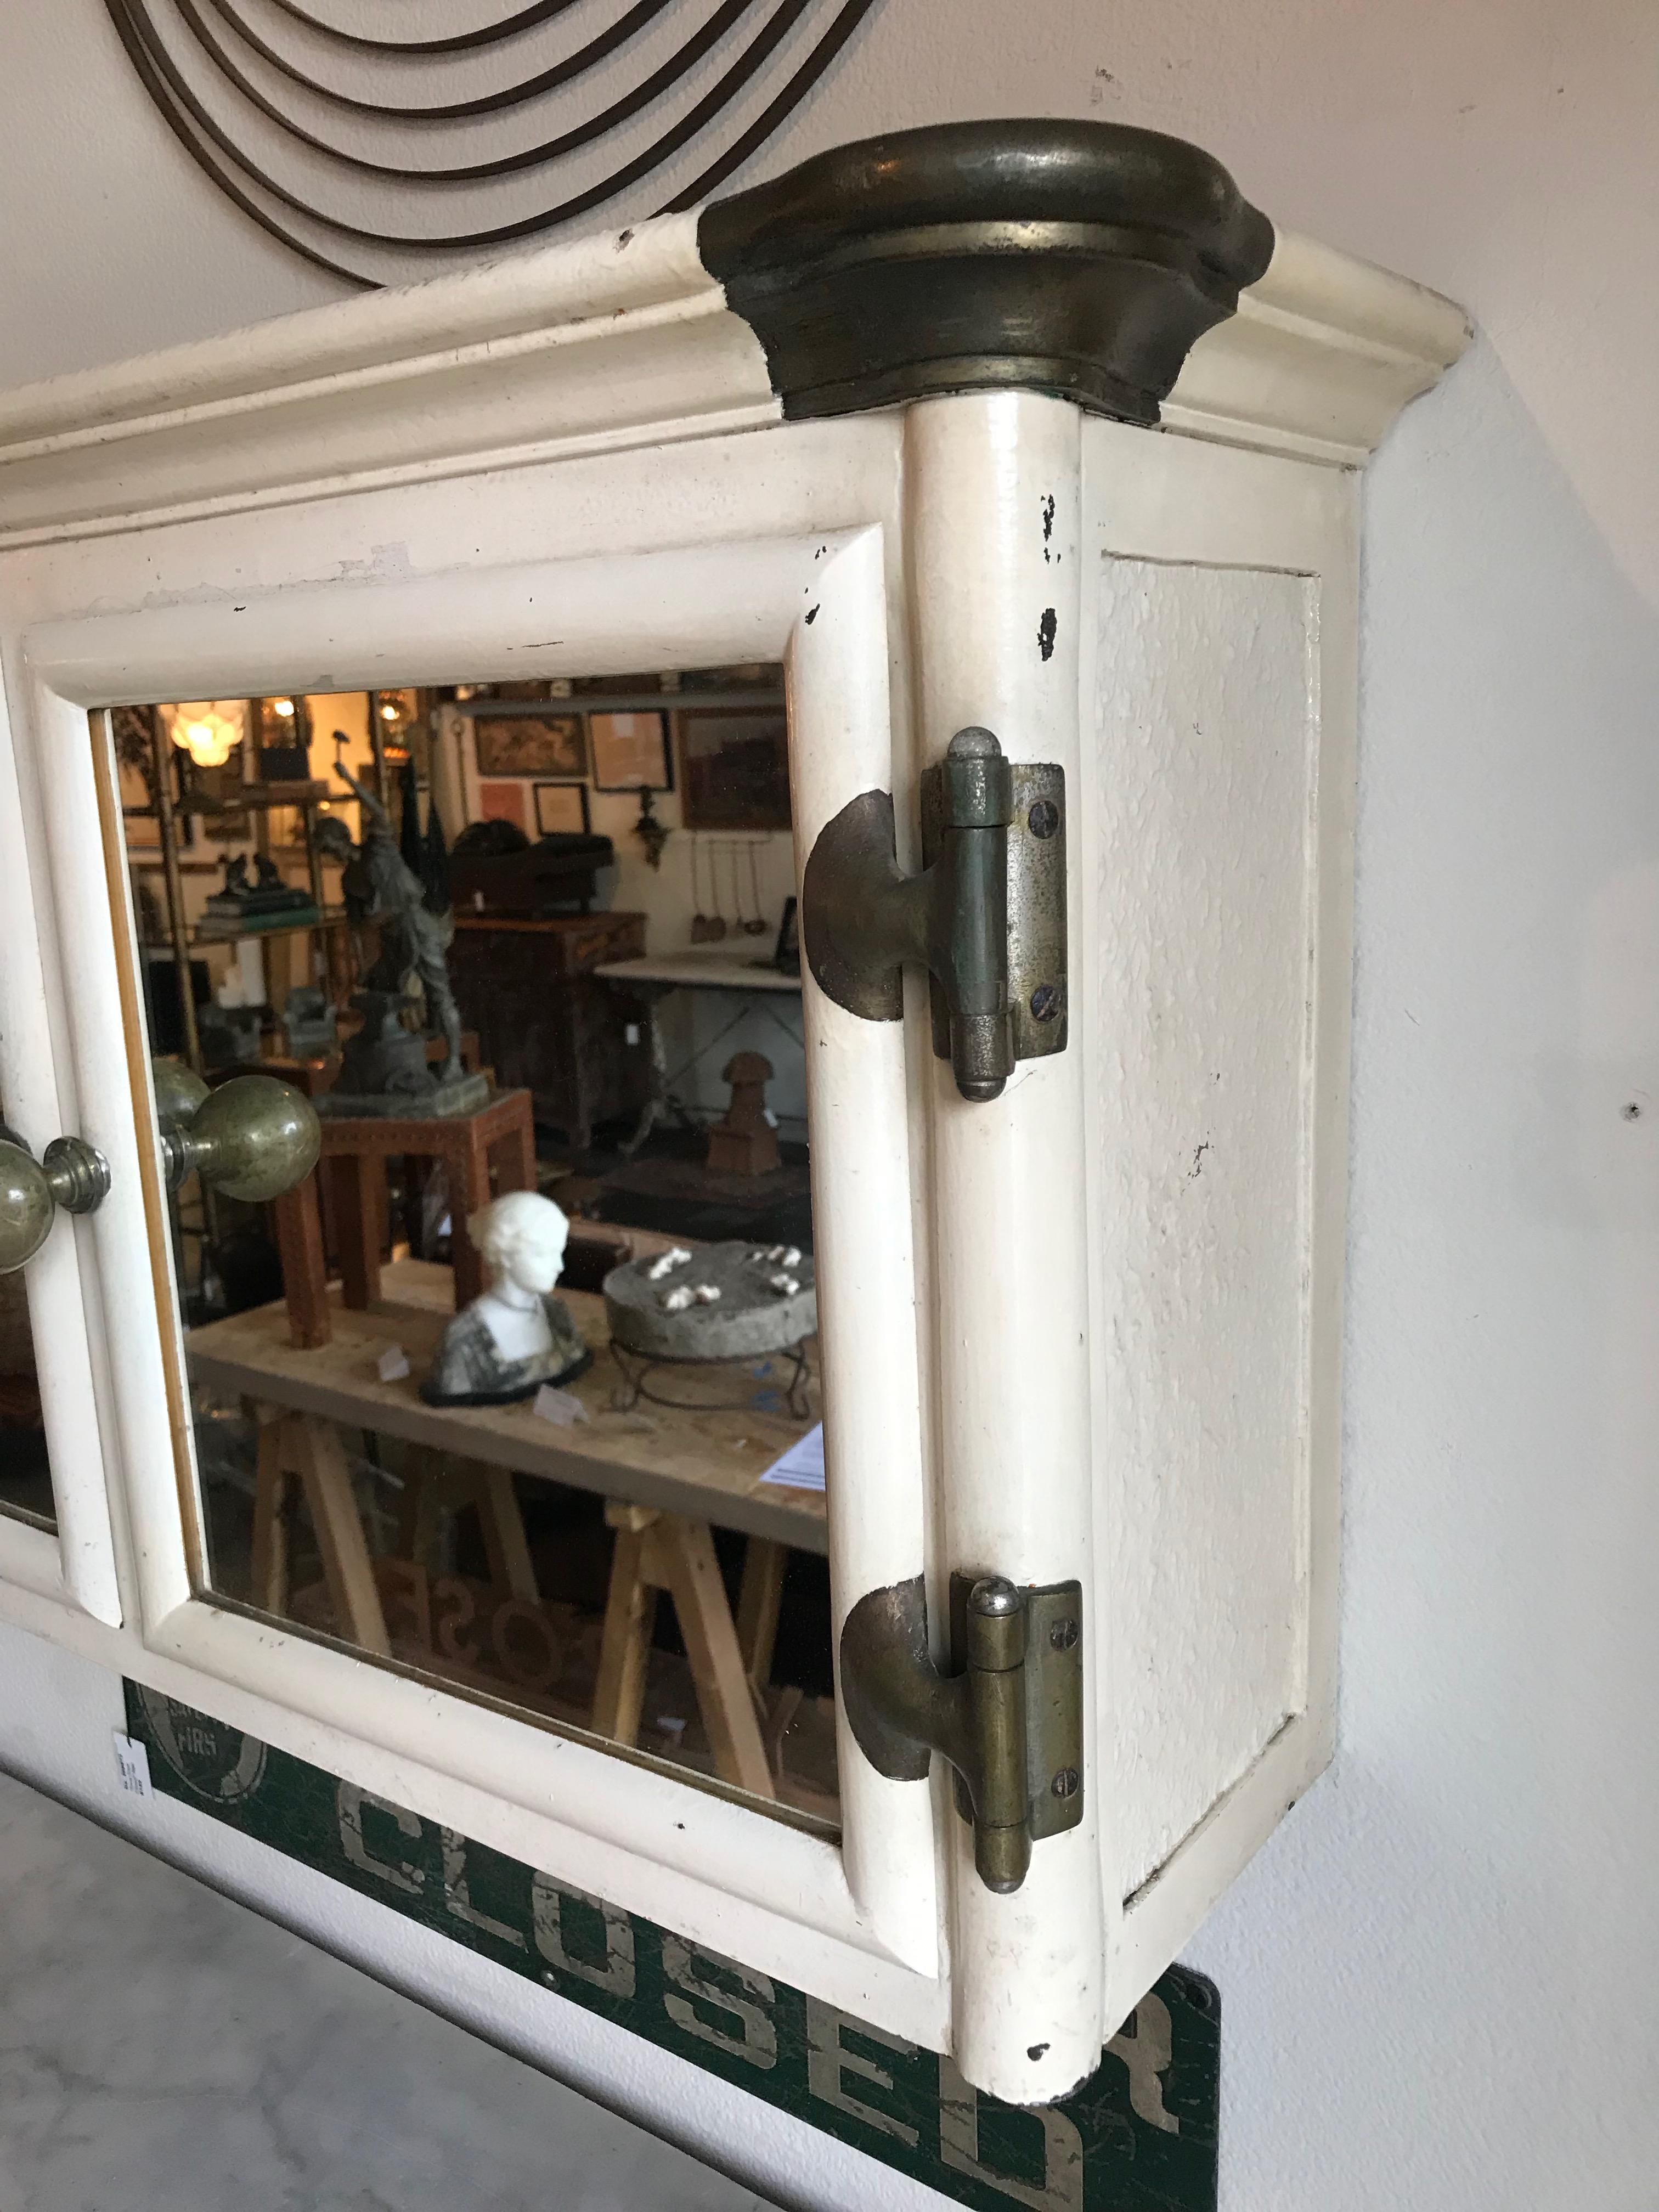 This is an Art Deco painted cast iron wall mount mirrored medicine cabinet from England. Oversized brass knobs, corner caps, and hinges make this incredibly attractive and unique. The interior is missing its shelves, however glass shelves can easily